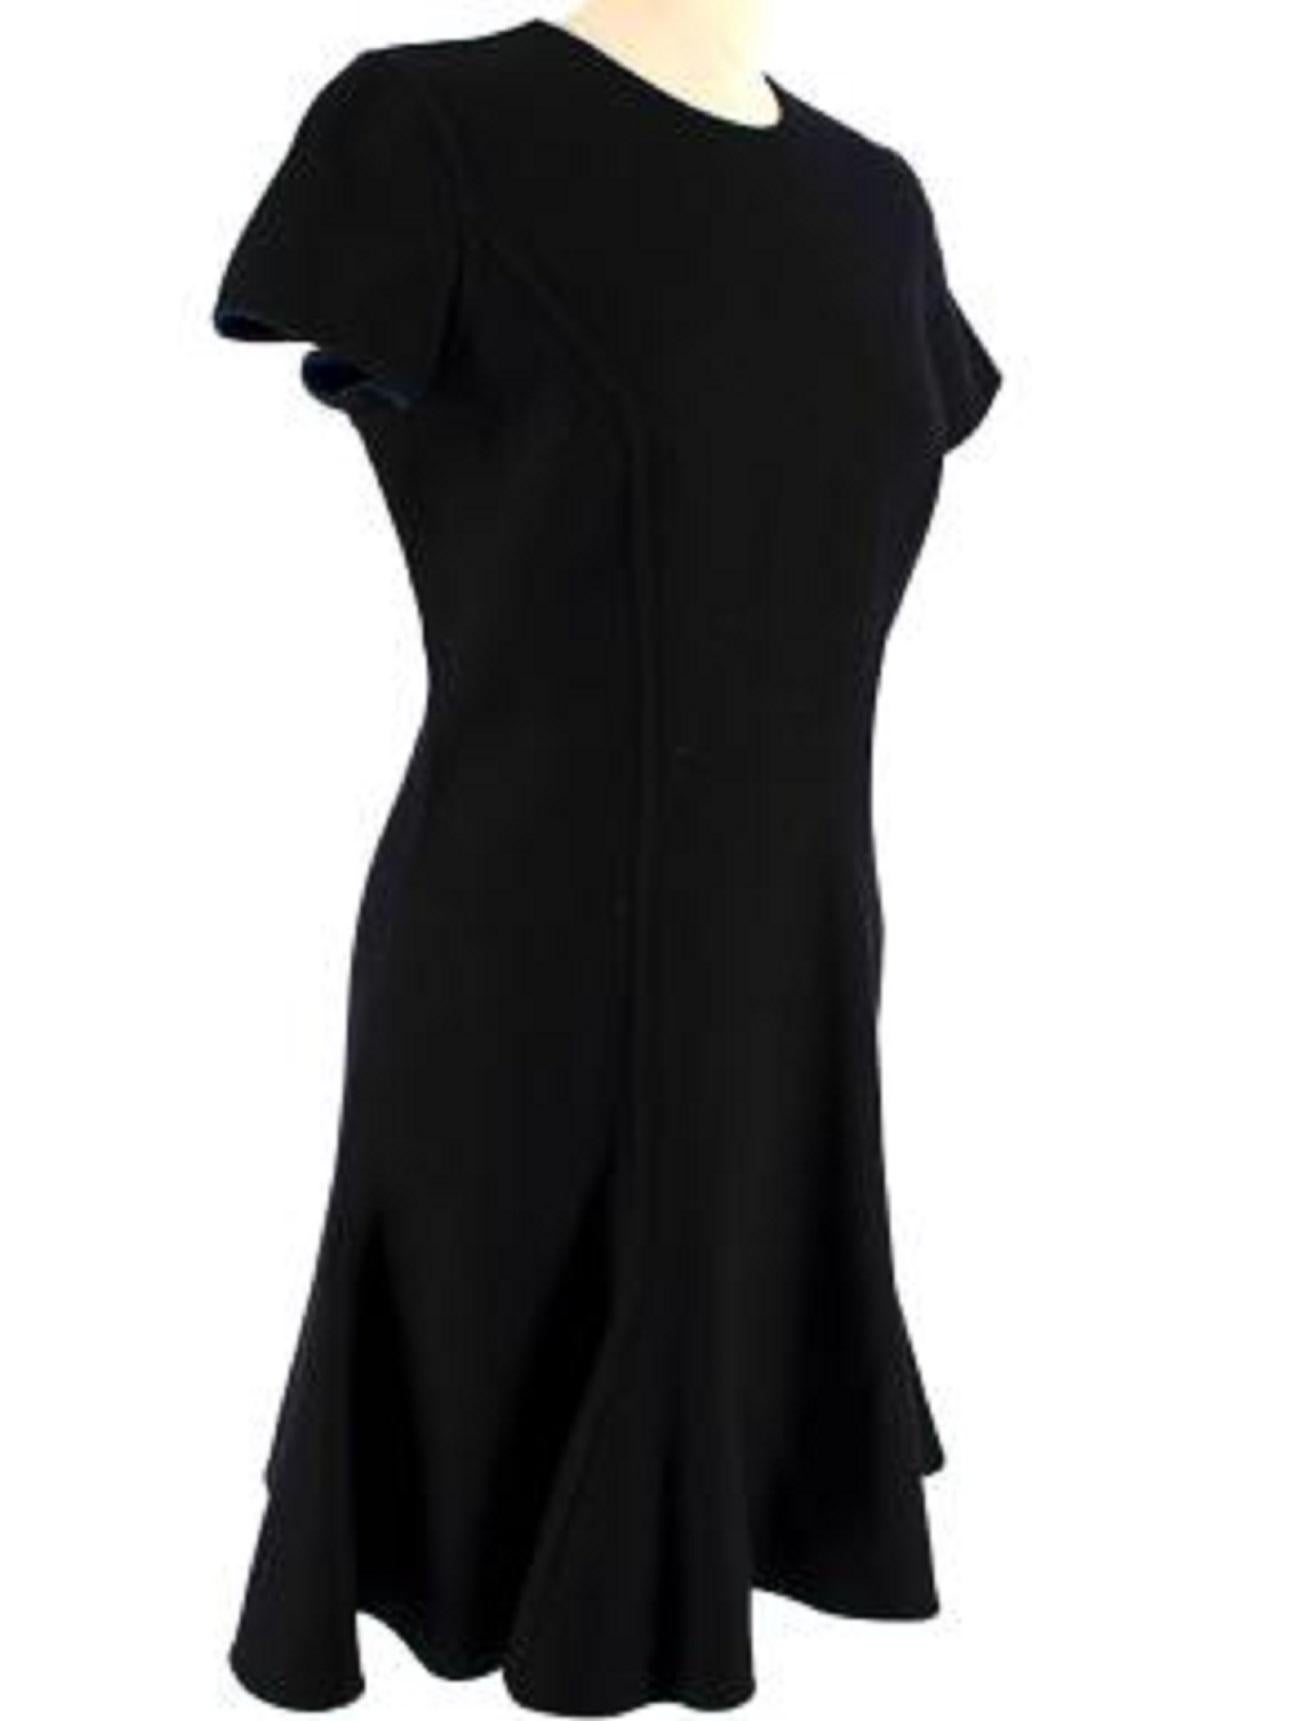 Dior Black Short Sleeve Skater dress 

-Blue lining 
-Round neckline 
-Zip fastening along the back 
-Short sleeve 
-Pleated at the skirt 
-Mid-weight construction 

Material: 

100% Cashmere 

Made in italy  

PLEASE NOTE, THESE ITEMS ARE PRE-OWNED